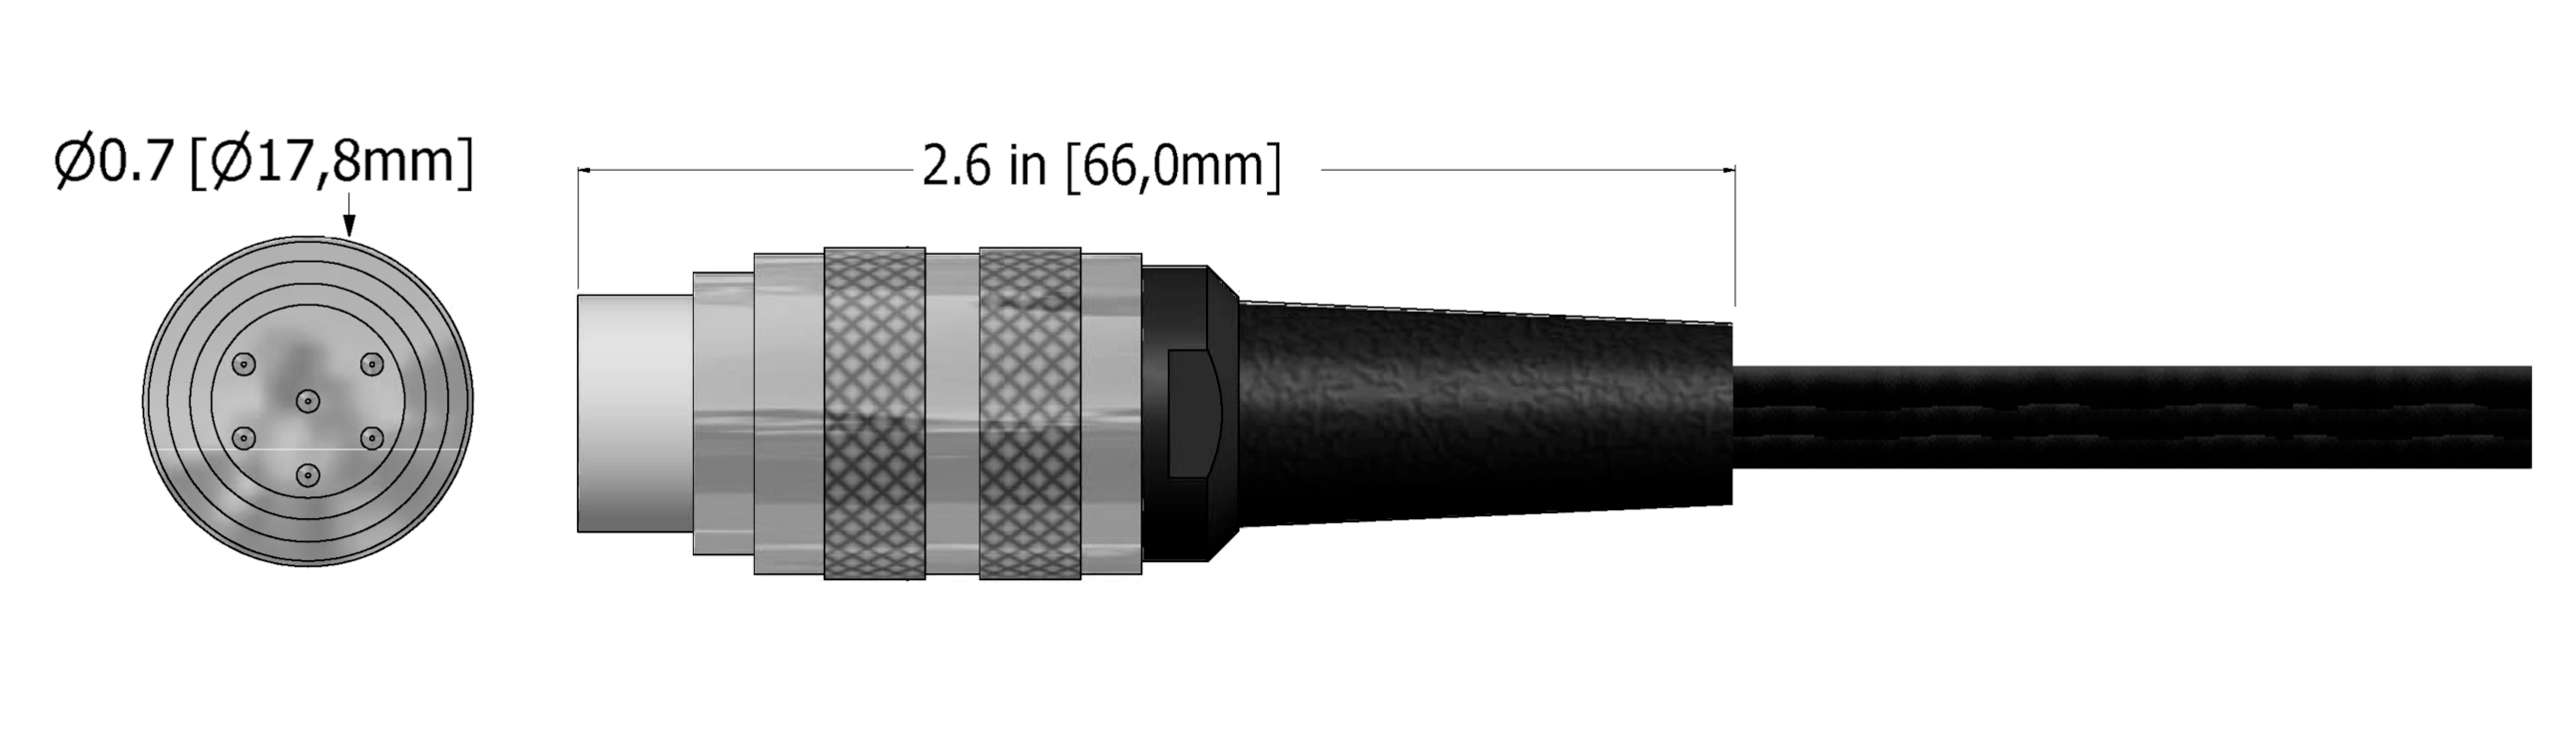 A line drawing showing the diameter and length of an assembled CTC C91 vibration sensor connector kit.